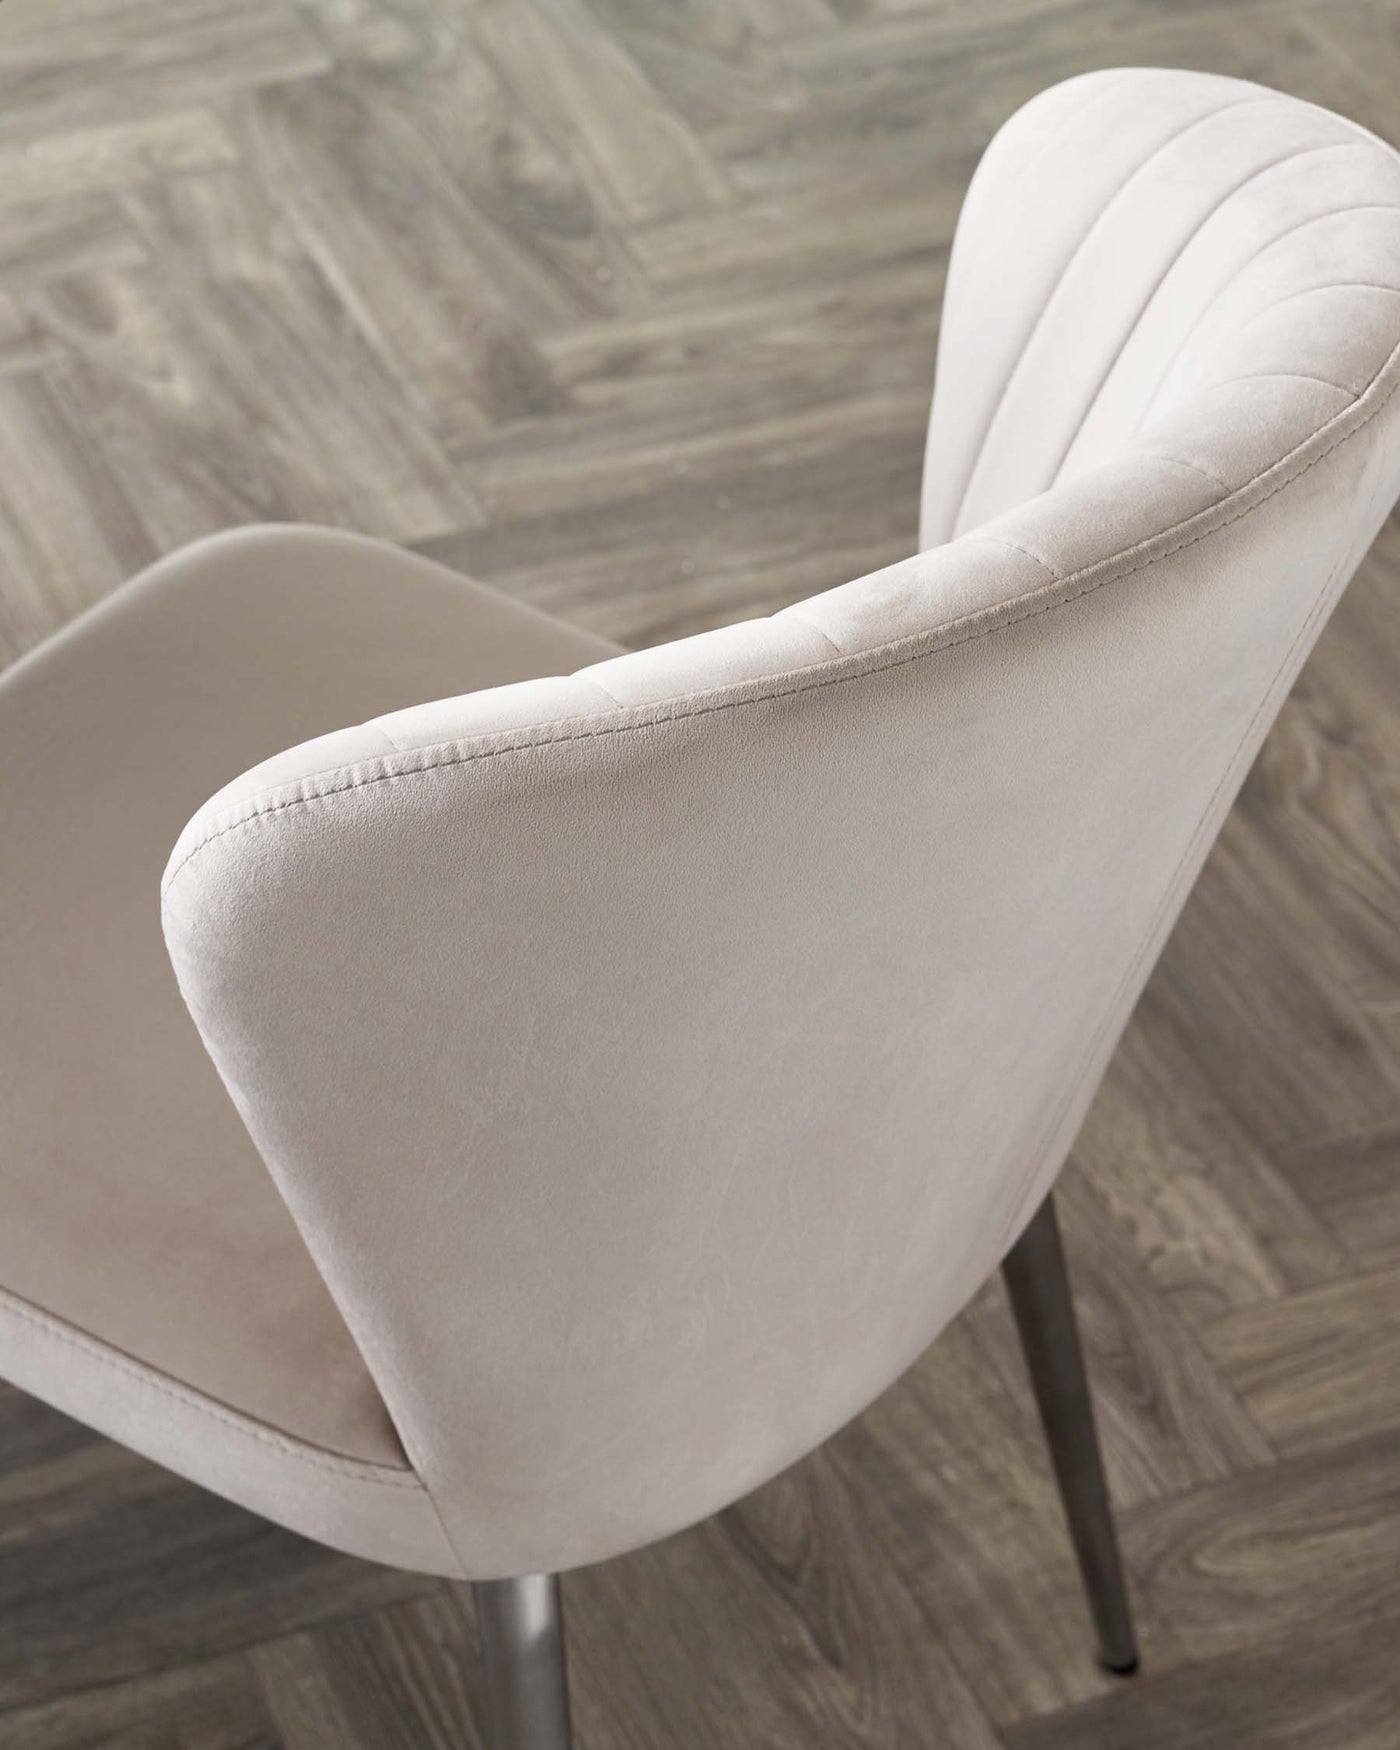 Elegant modern dining chair with a curved backrest and vertical stitching detail, upholstered in a light grey fabric, standing on slender metal legs with a matte finish.